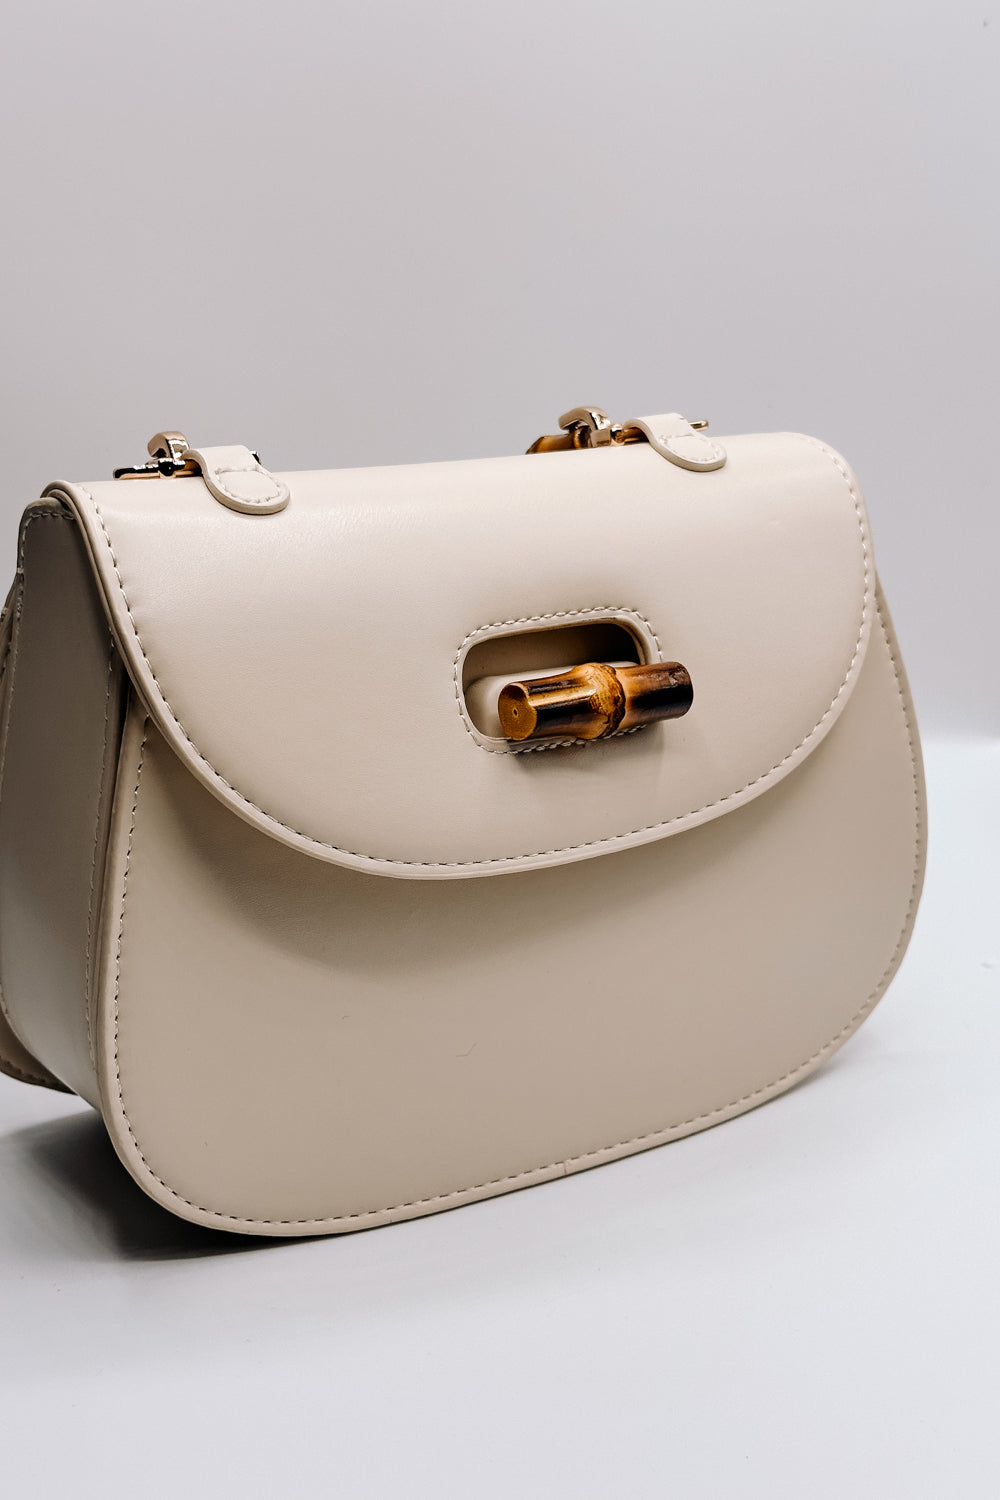 Image shows the Allison Ivory Wooden Bamboo Strap Purse which features ivory leather, wooden bamboo strap and knob closure, black lining and gold hardware details